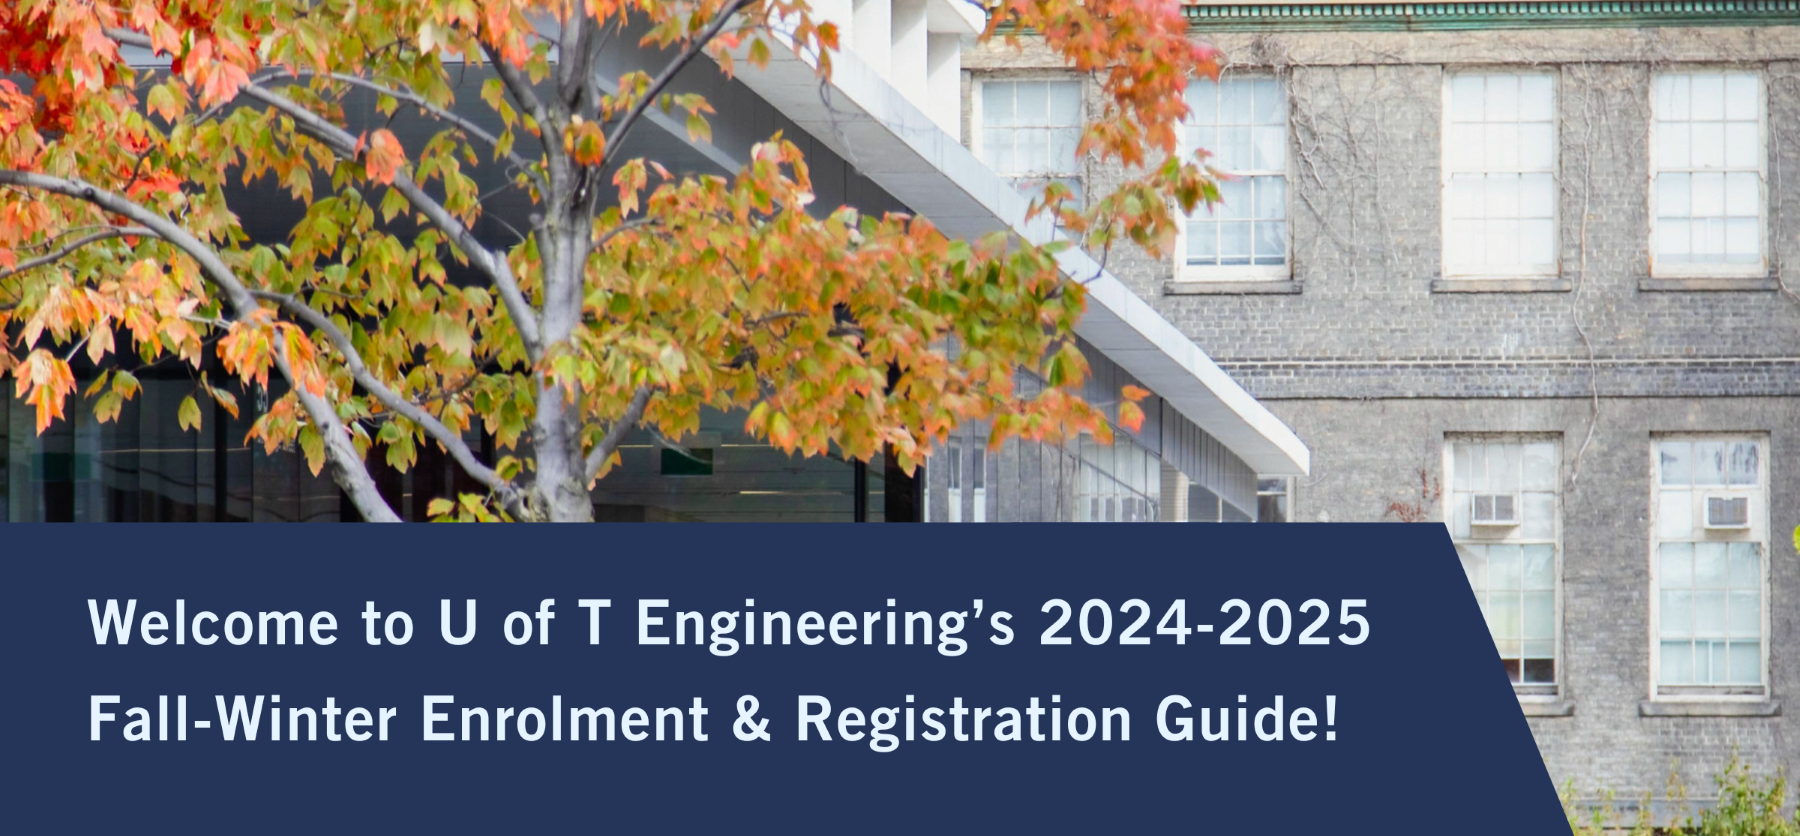 Welcome to U of T Engineering’s 2024-2025 Fall-Winter Enrolment & Registration Guide! (1)2